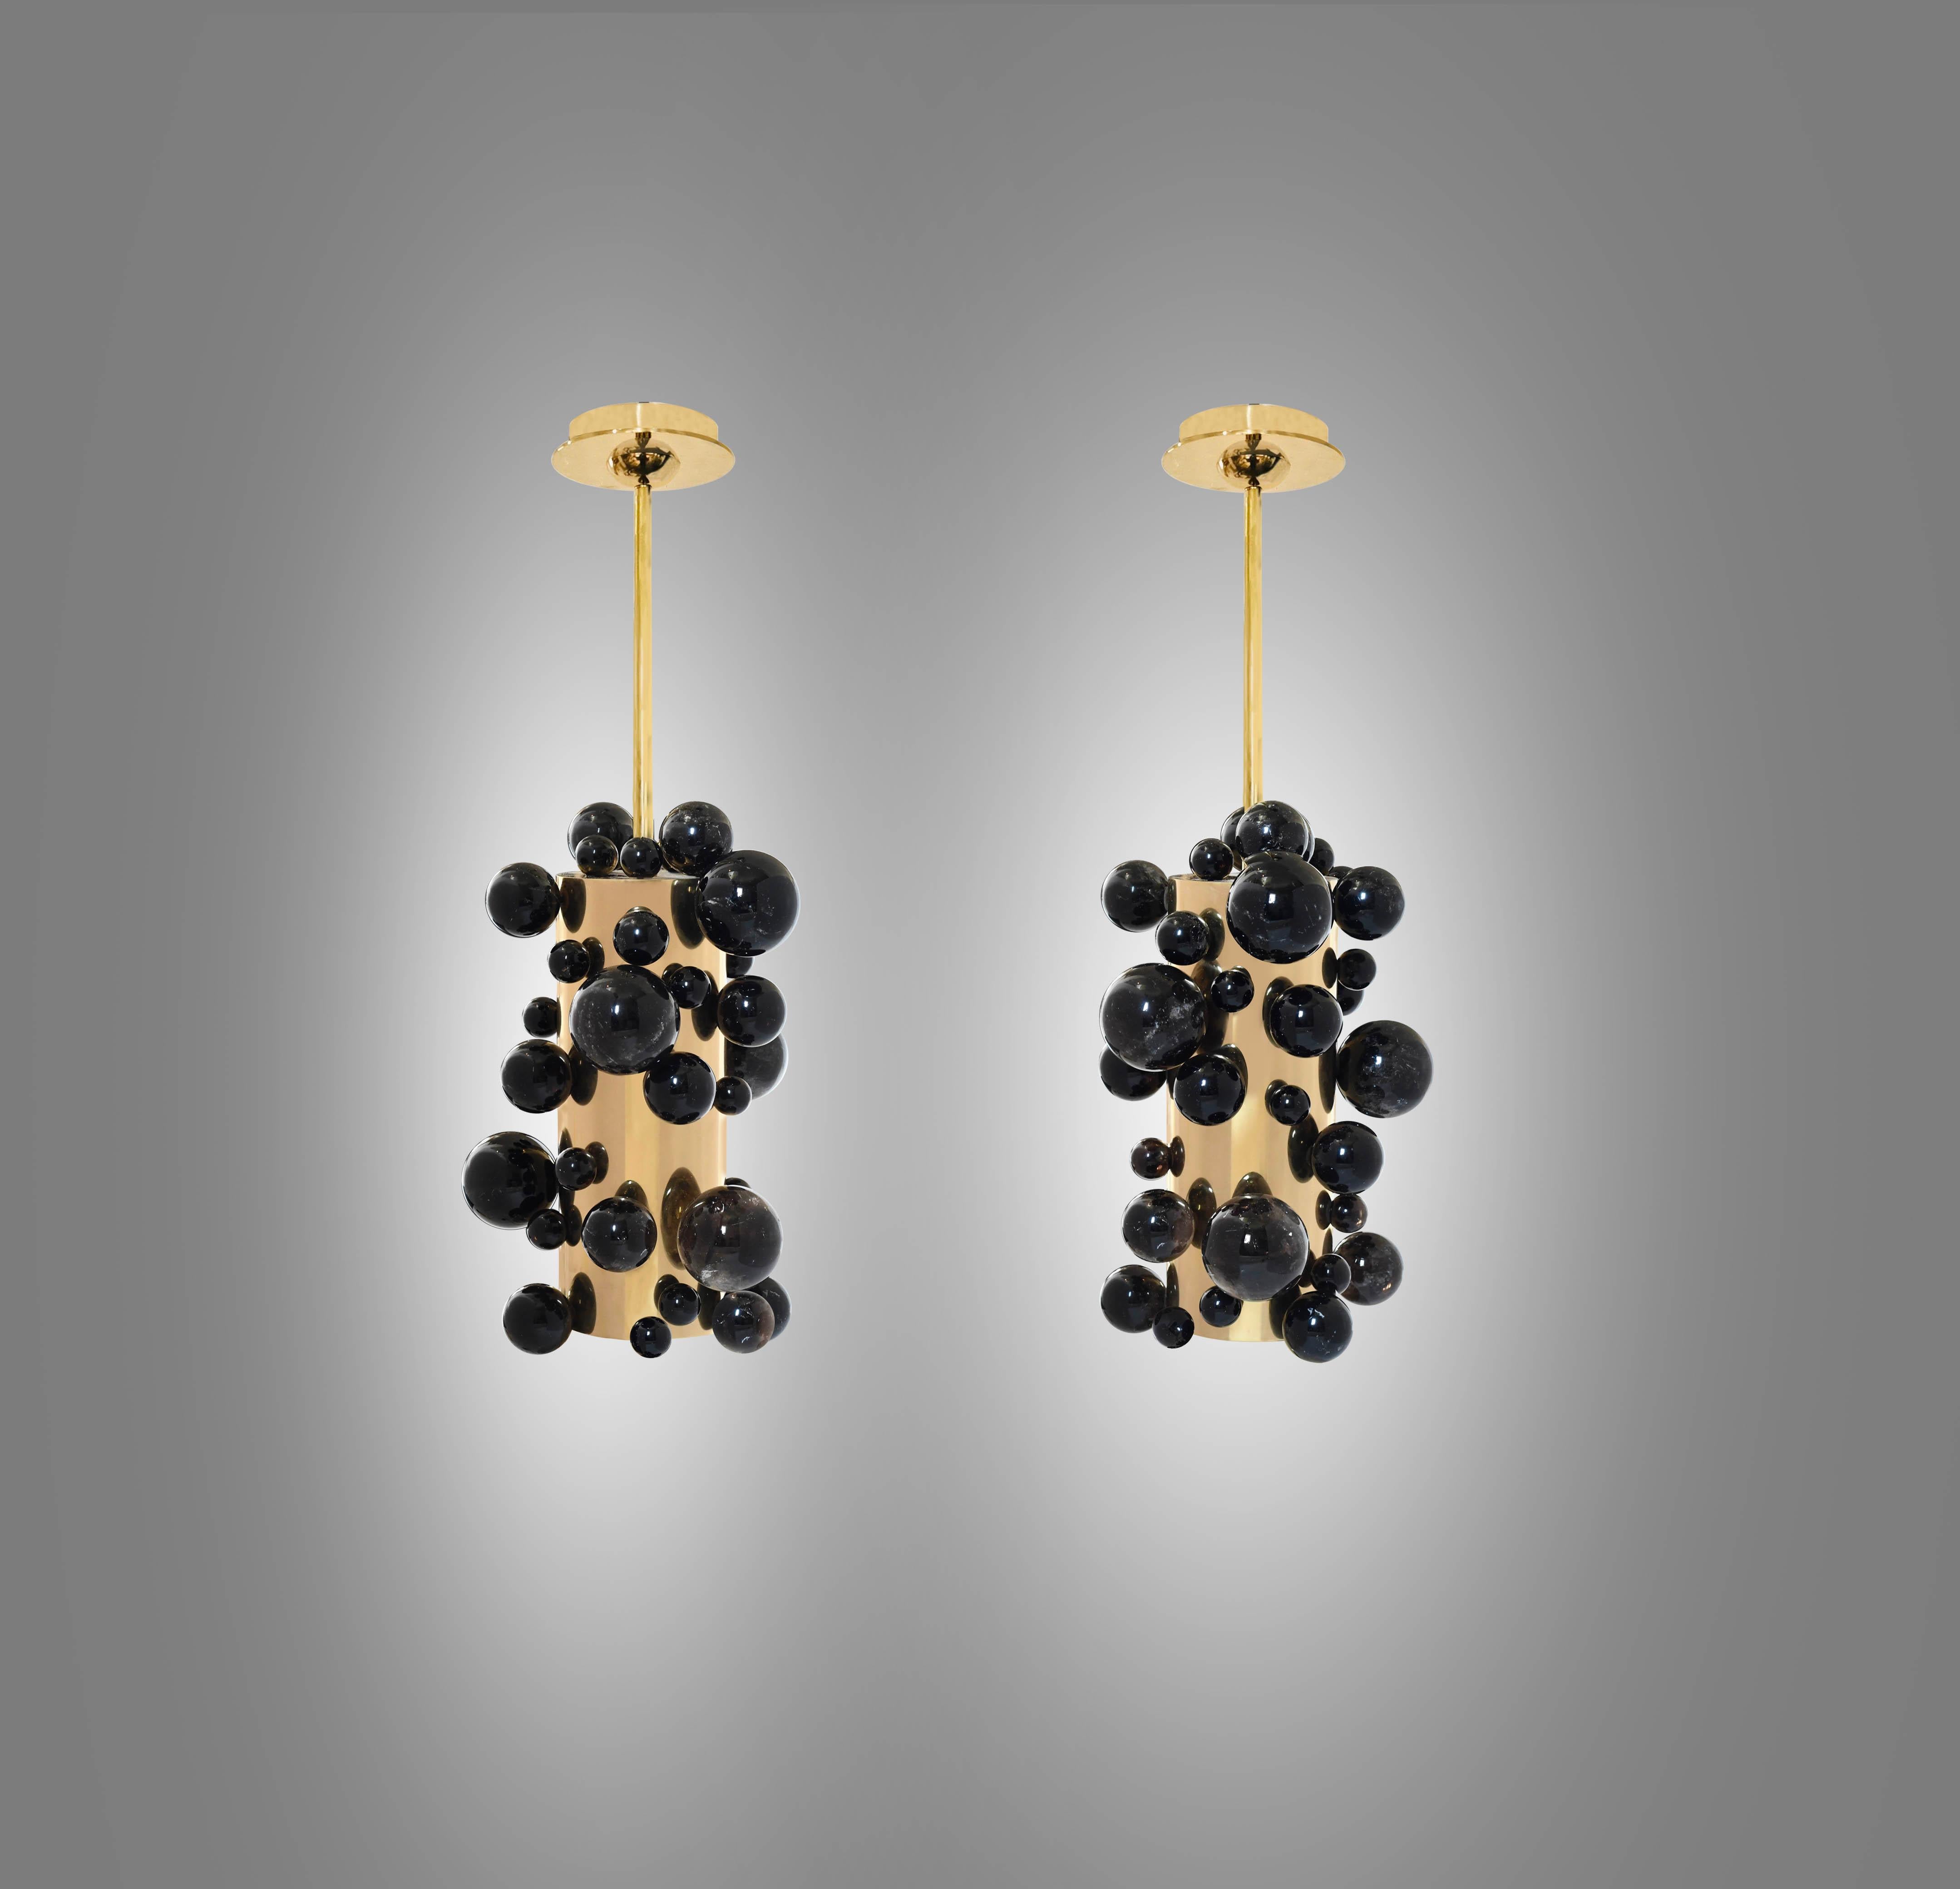 Pair of smoky rock crystal bubble pendant lights with polished brass finishes. Created by Phoenix Gallery, NYC.
One socket installed each light. Use LED warm light bulbs. 80w each. 
Dimension of the pendant: 8